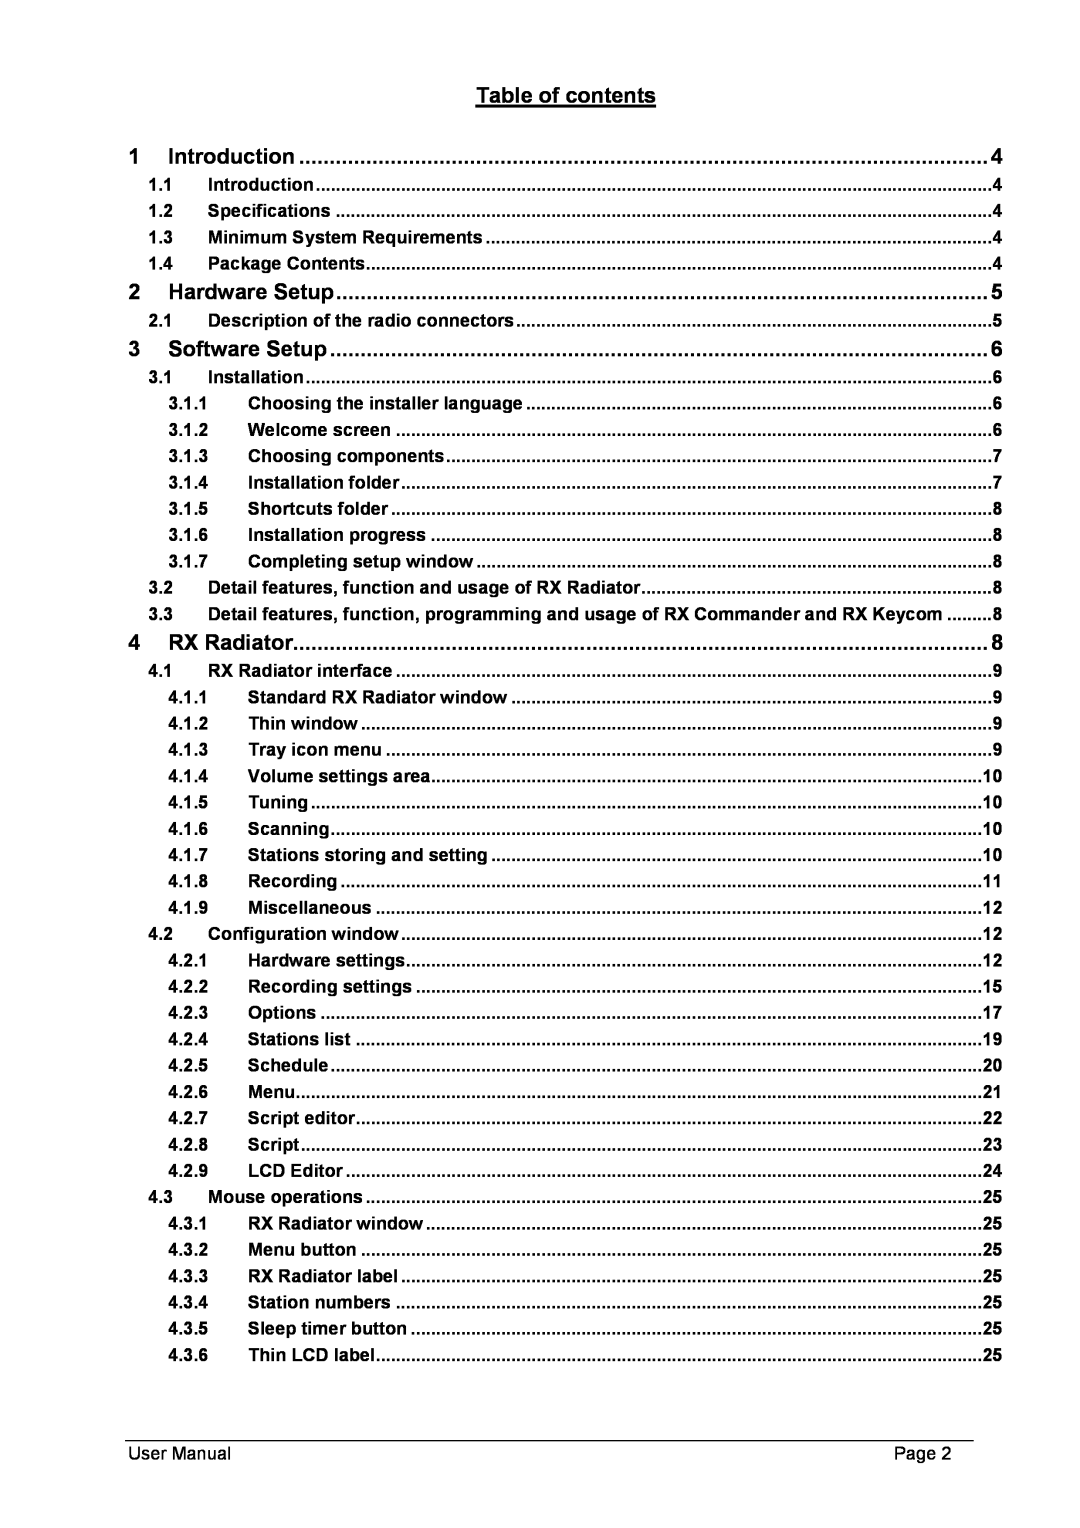 Philips FMU-100 user manual Table of contents 